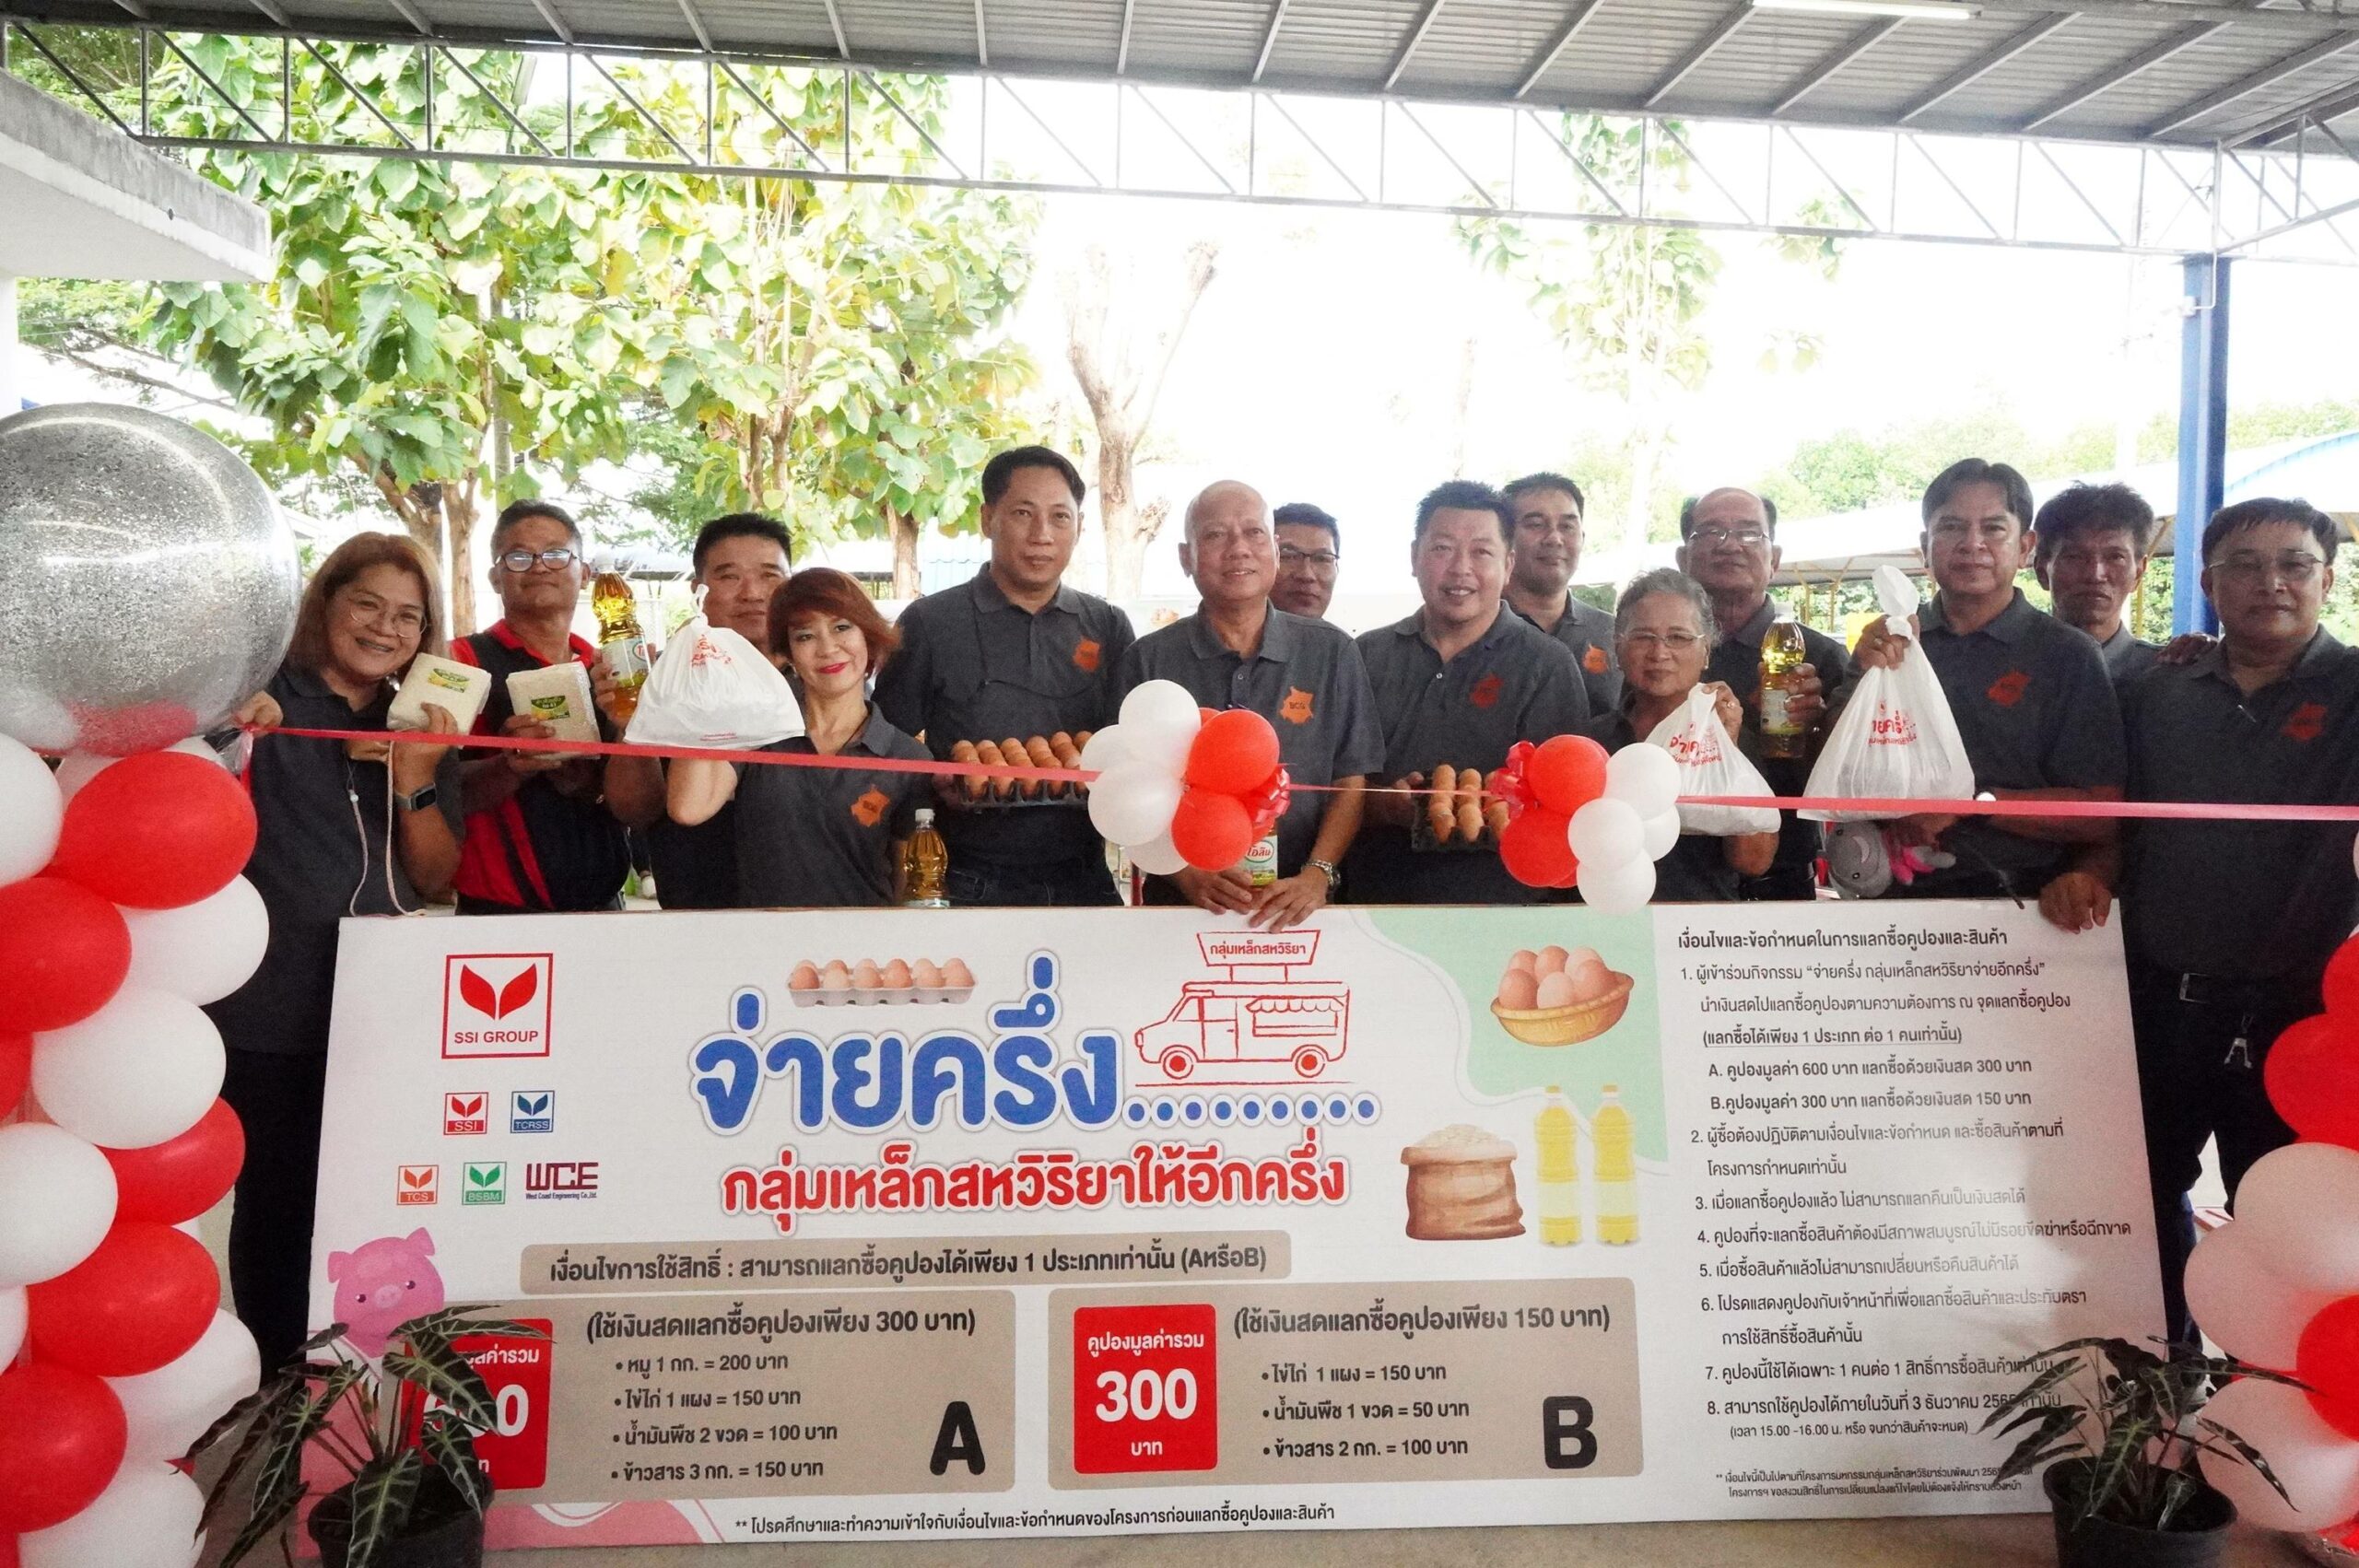 To help reduce cost of living of Bangsaphan people, SSI Group arranged “The Half-Half Co-payment Market”